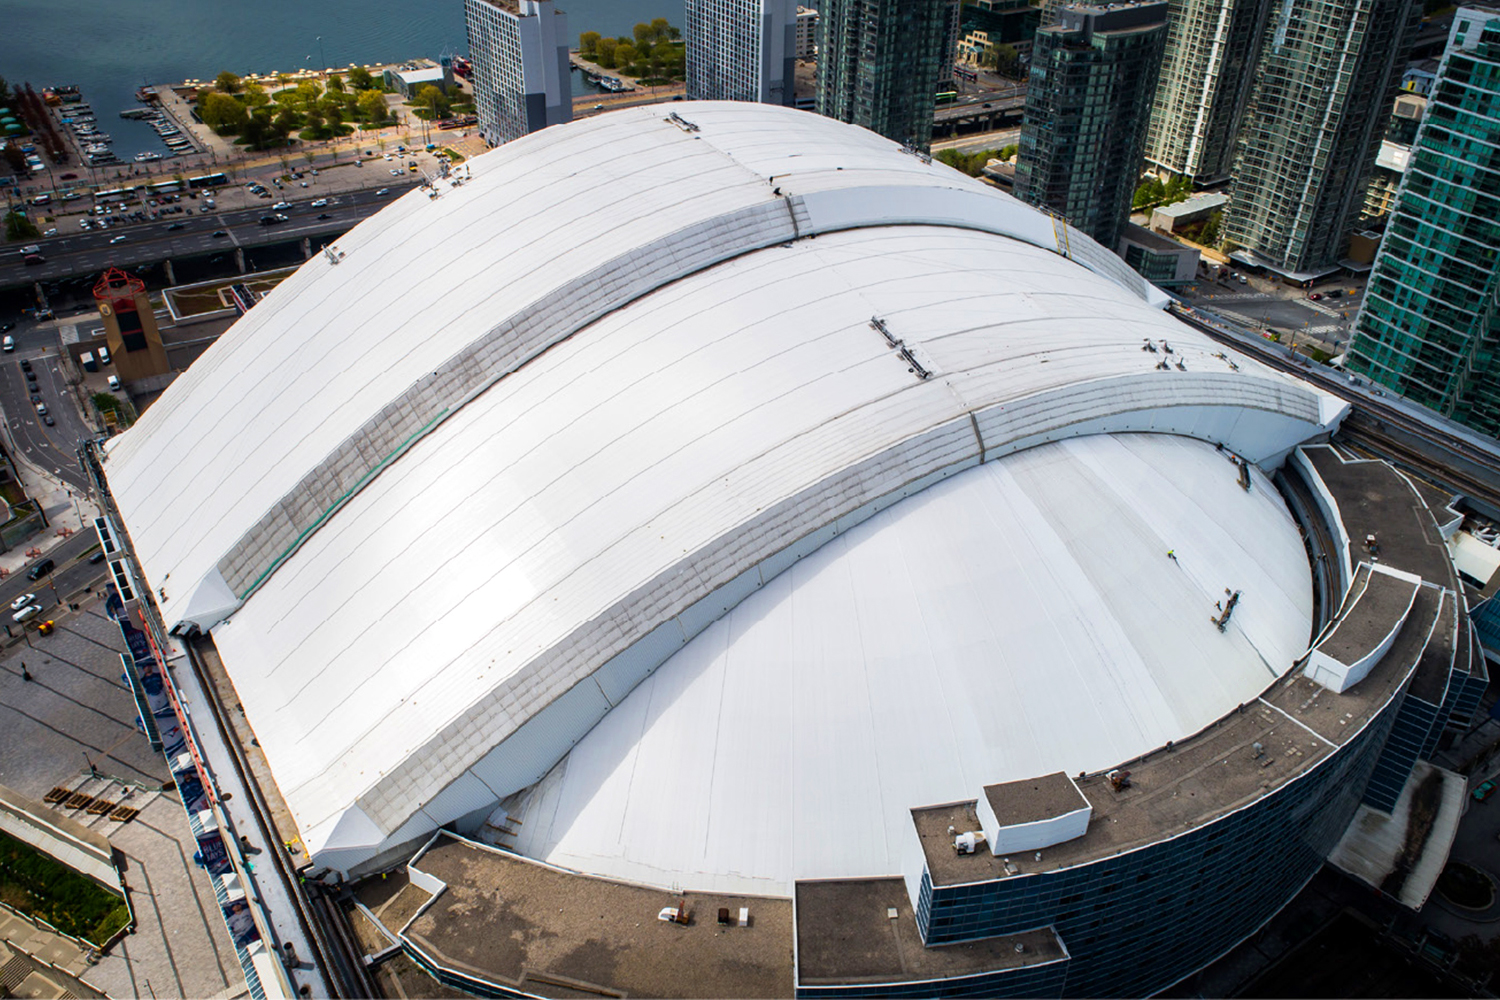 Sika Sarnafil facilitated the original vinyl roof of Toronto’s Rogers Centre being reclaimed and made into a new roof.